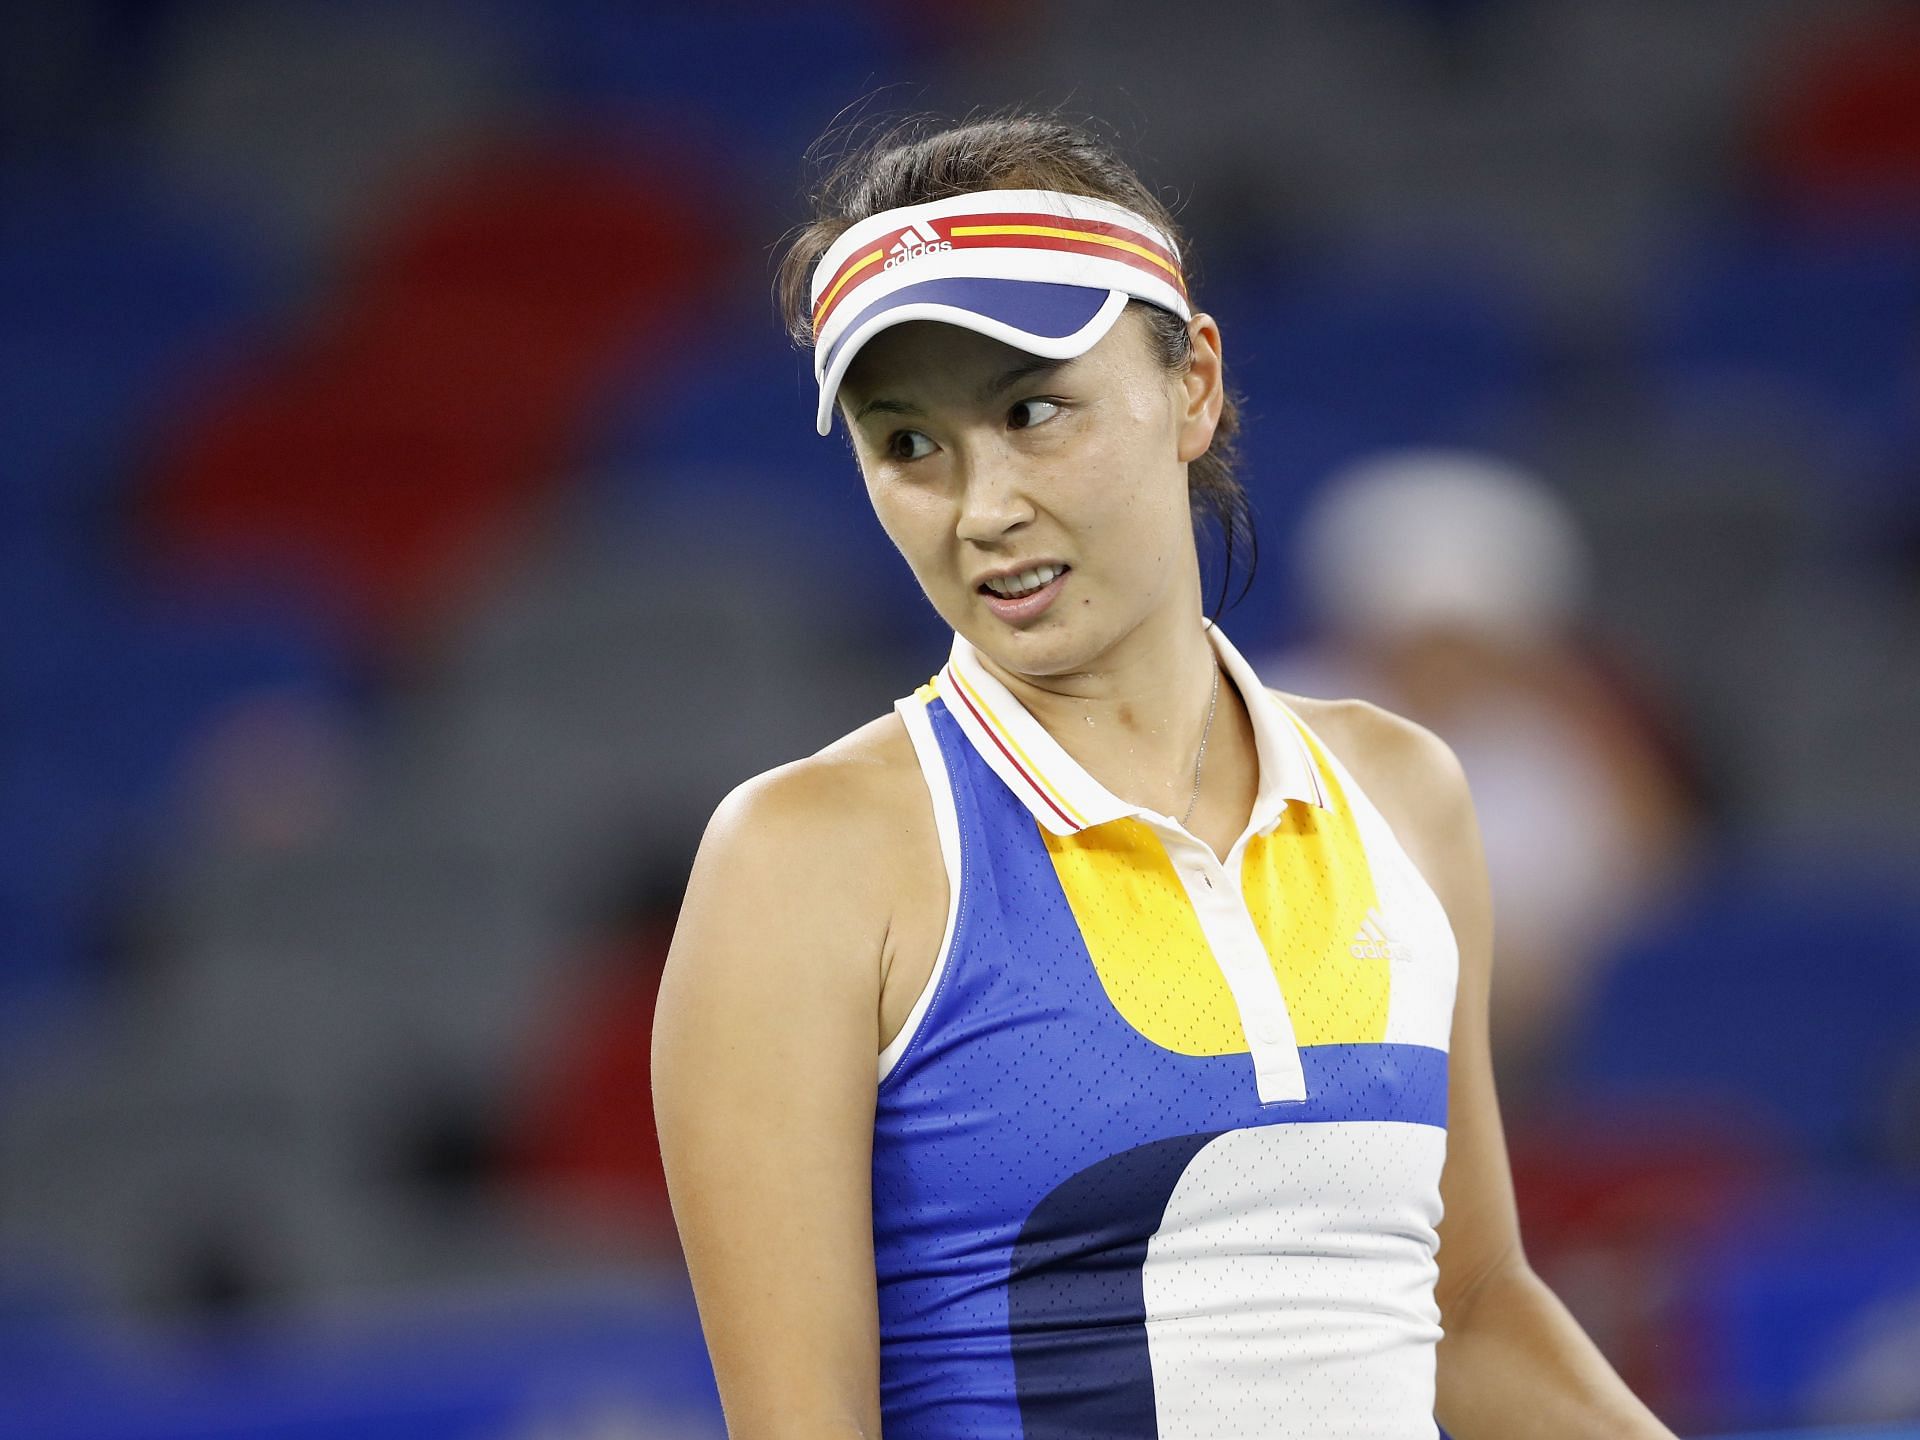 .Peng Shuai has already received support from the WTA &amp; ATP